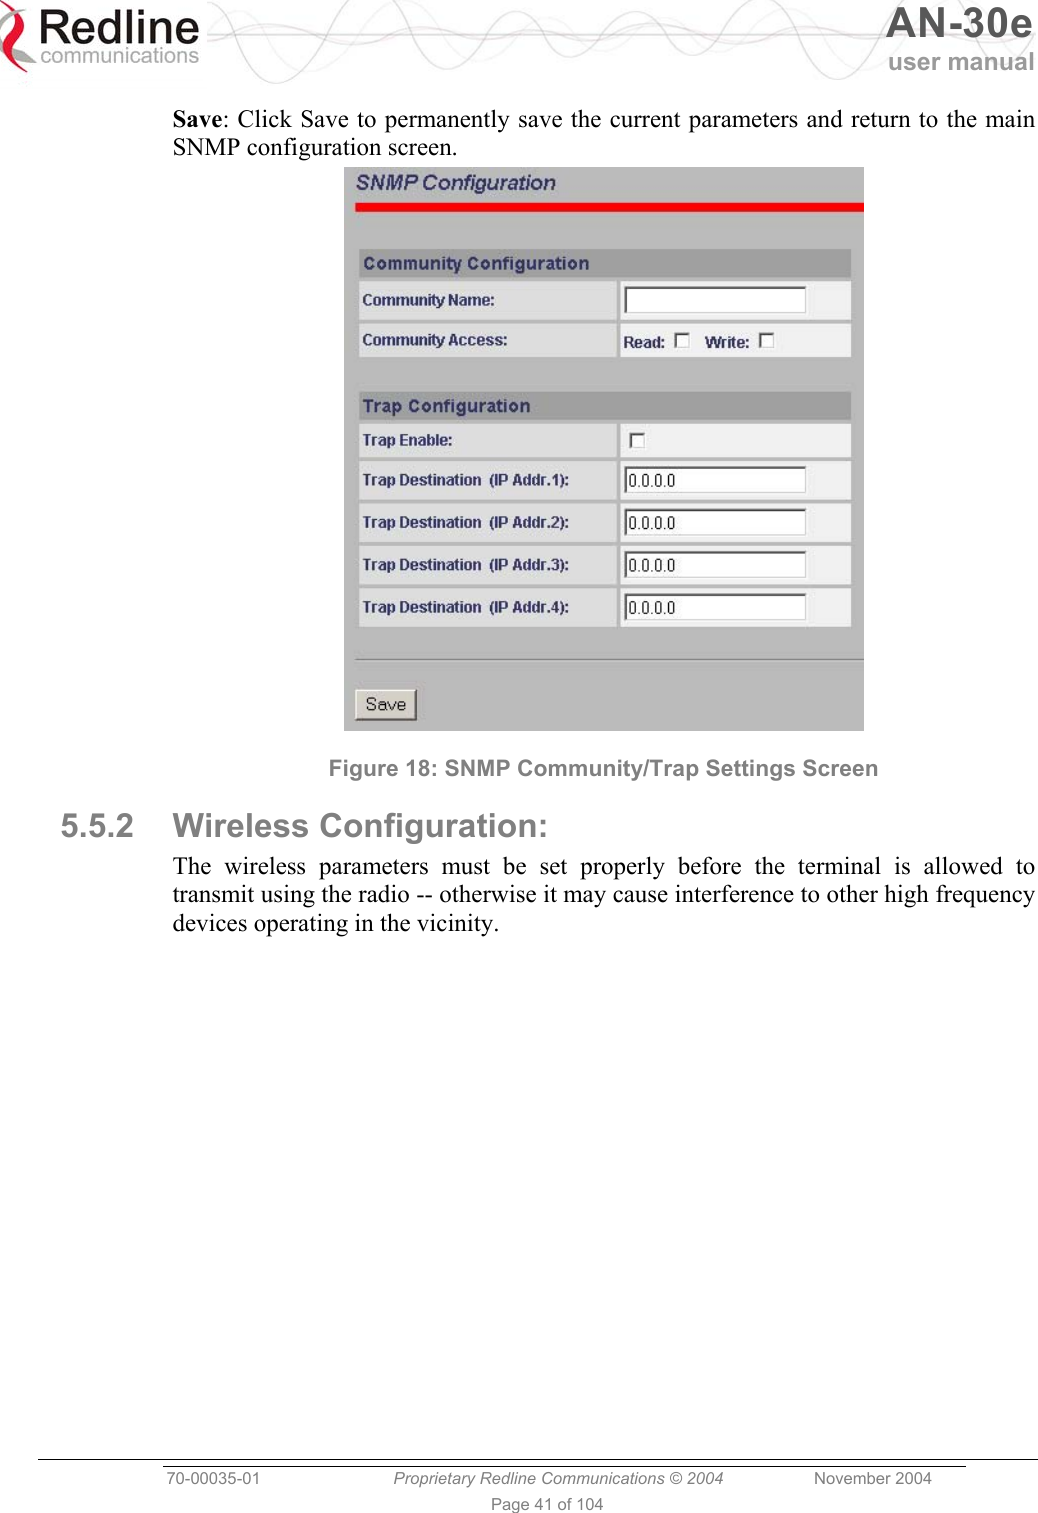   AN-30e user manual  70-00035-01  Proprietary Redline Communications © 2004 November 2004   Page 41 of 104 Save: Click Save to permanently save the current parameters and return to the main SNMP configuration screen.  Figure 18: SNMP Community/Trap Settings Screen  5.5.2 Wireless Configuration: The wireless parameters must be set properly before the terminal is allowed to transmit using the radio -- otherwise it may cause interference to other high frequency devices operating in the vicinity. 